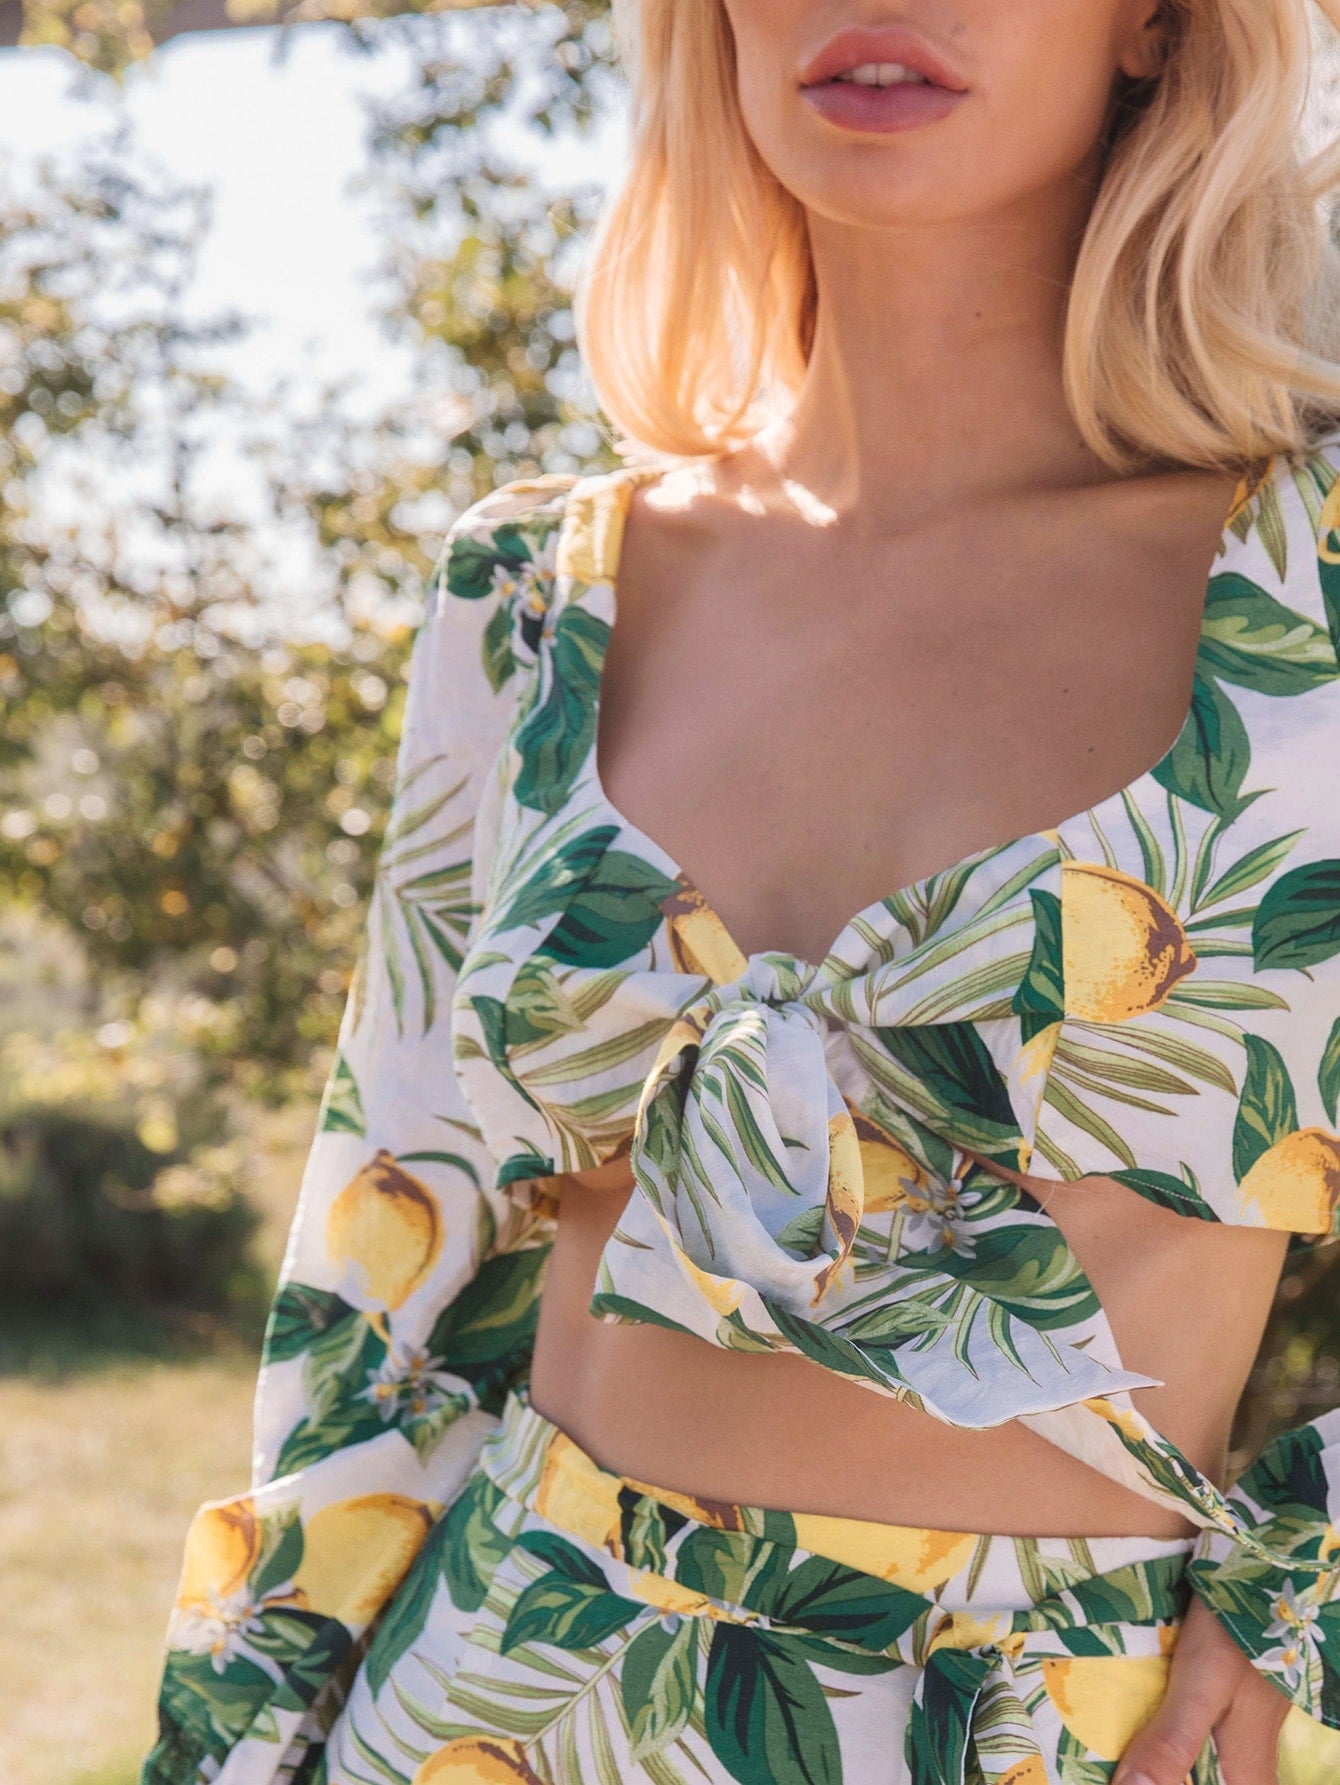 Lemon and Tropical Print Tie Front Top and Skirt Set